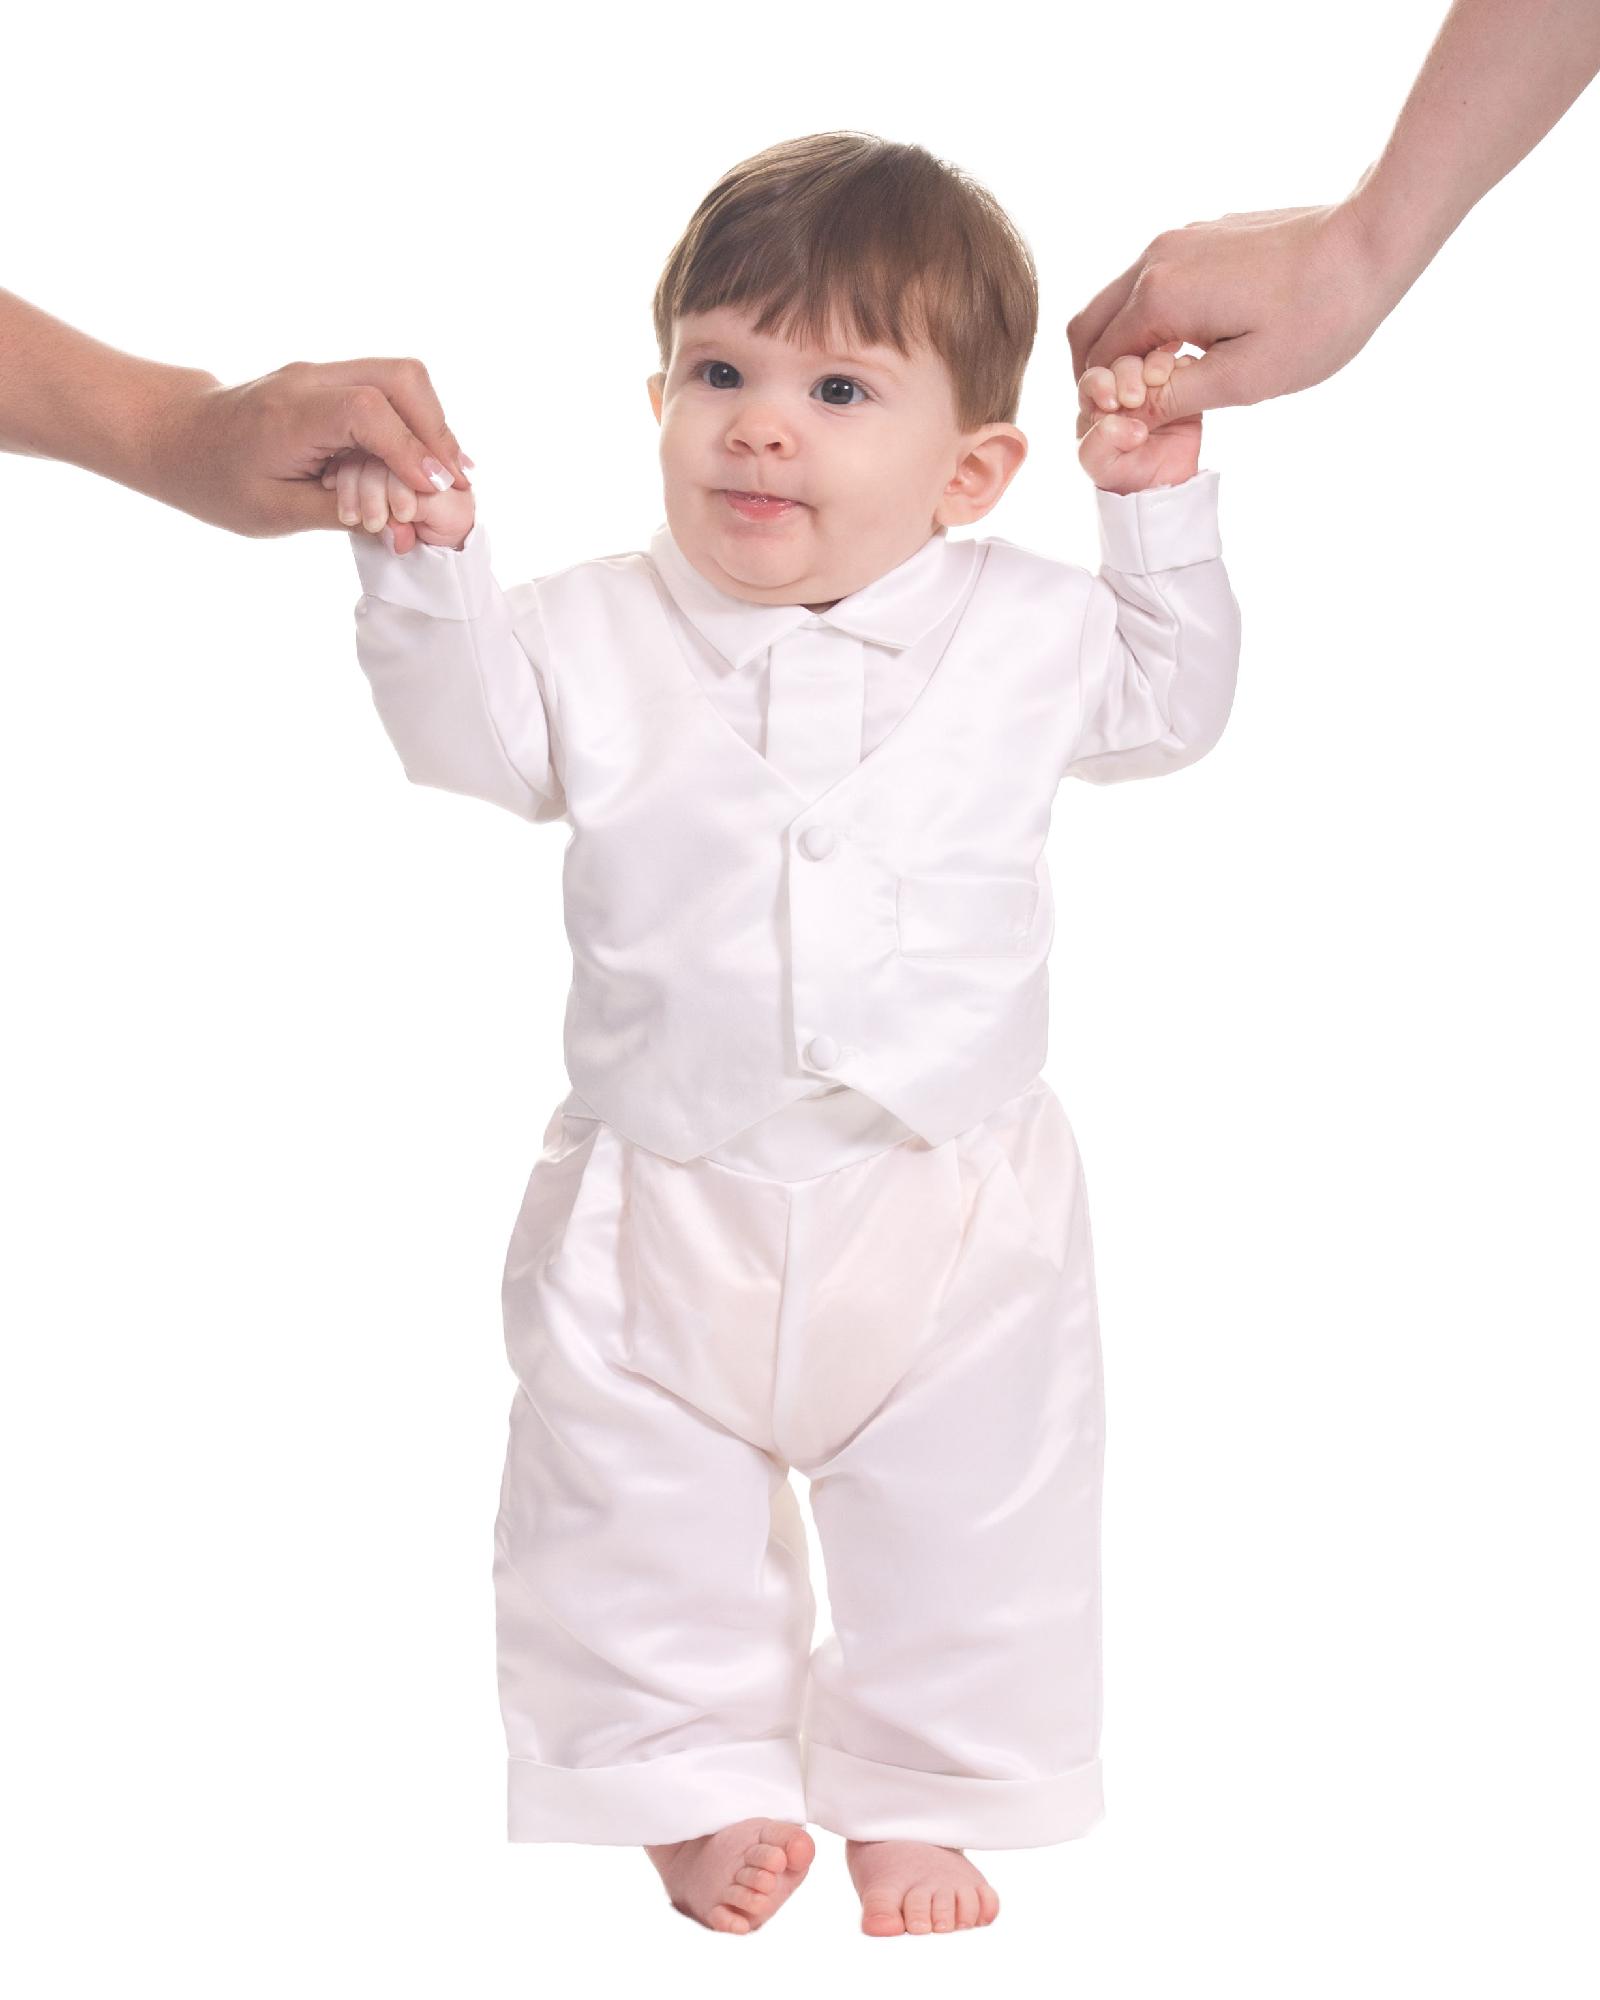 The Children's Hour Baby Boys' Tuxedo with Bonnet - White 12 Month